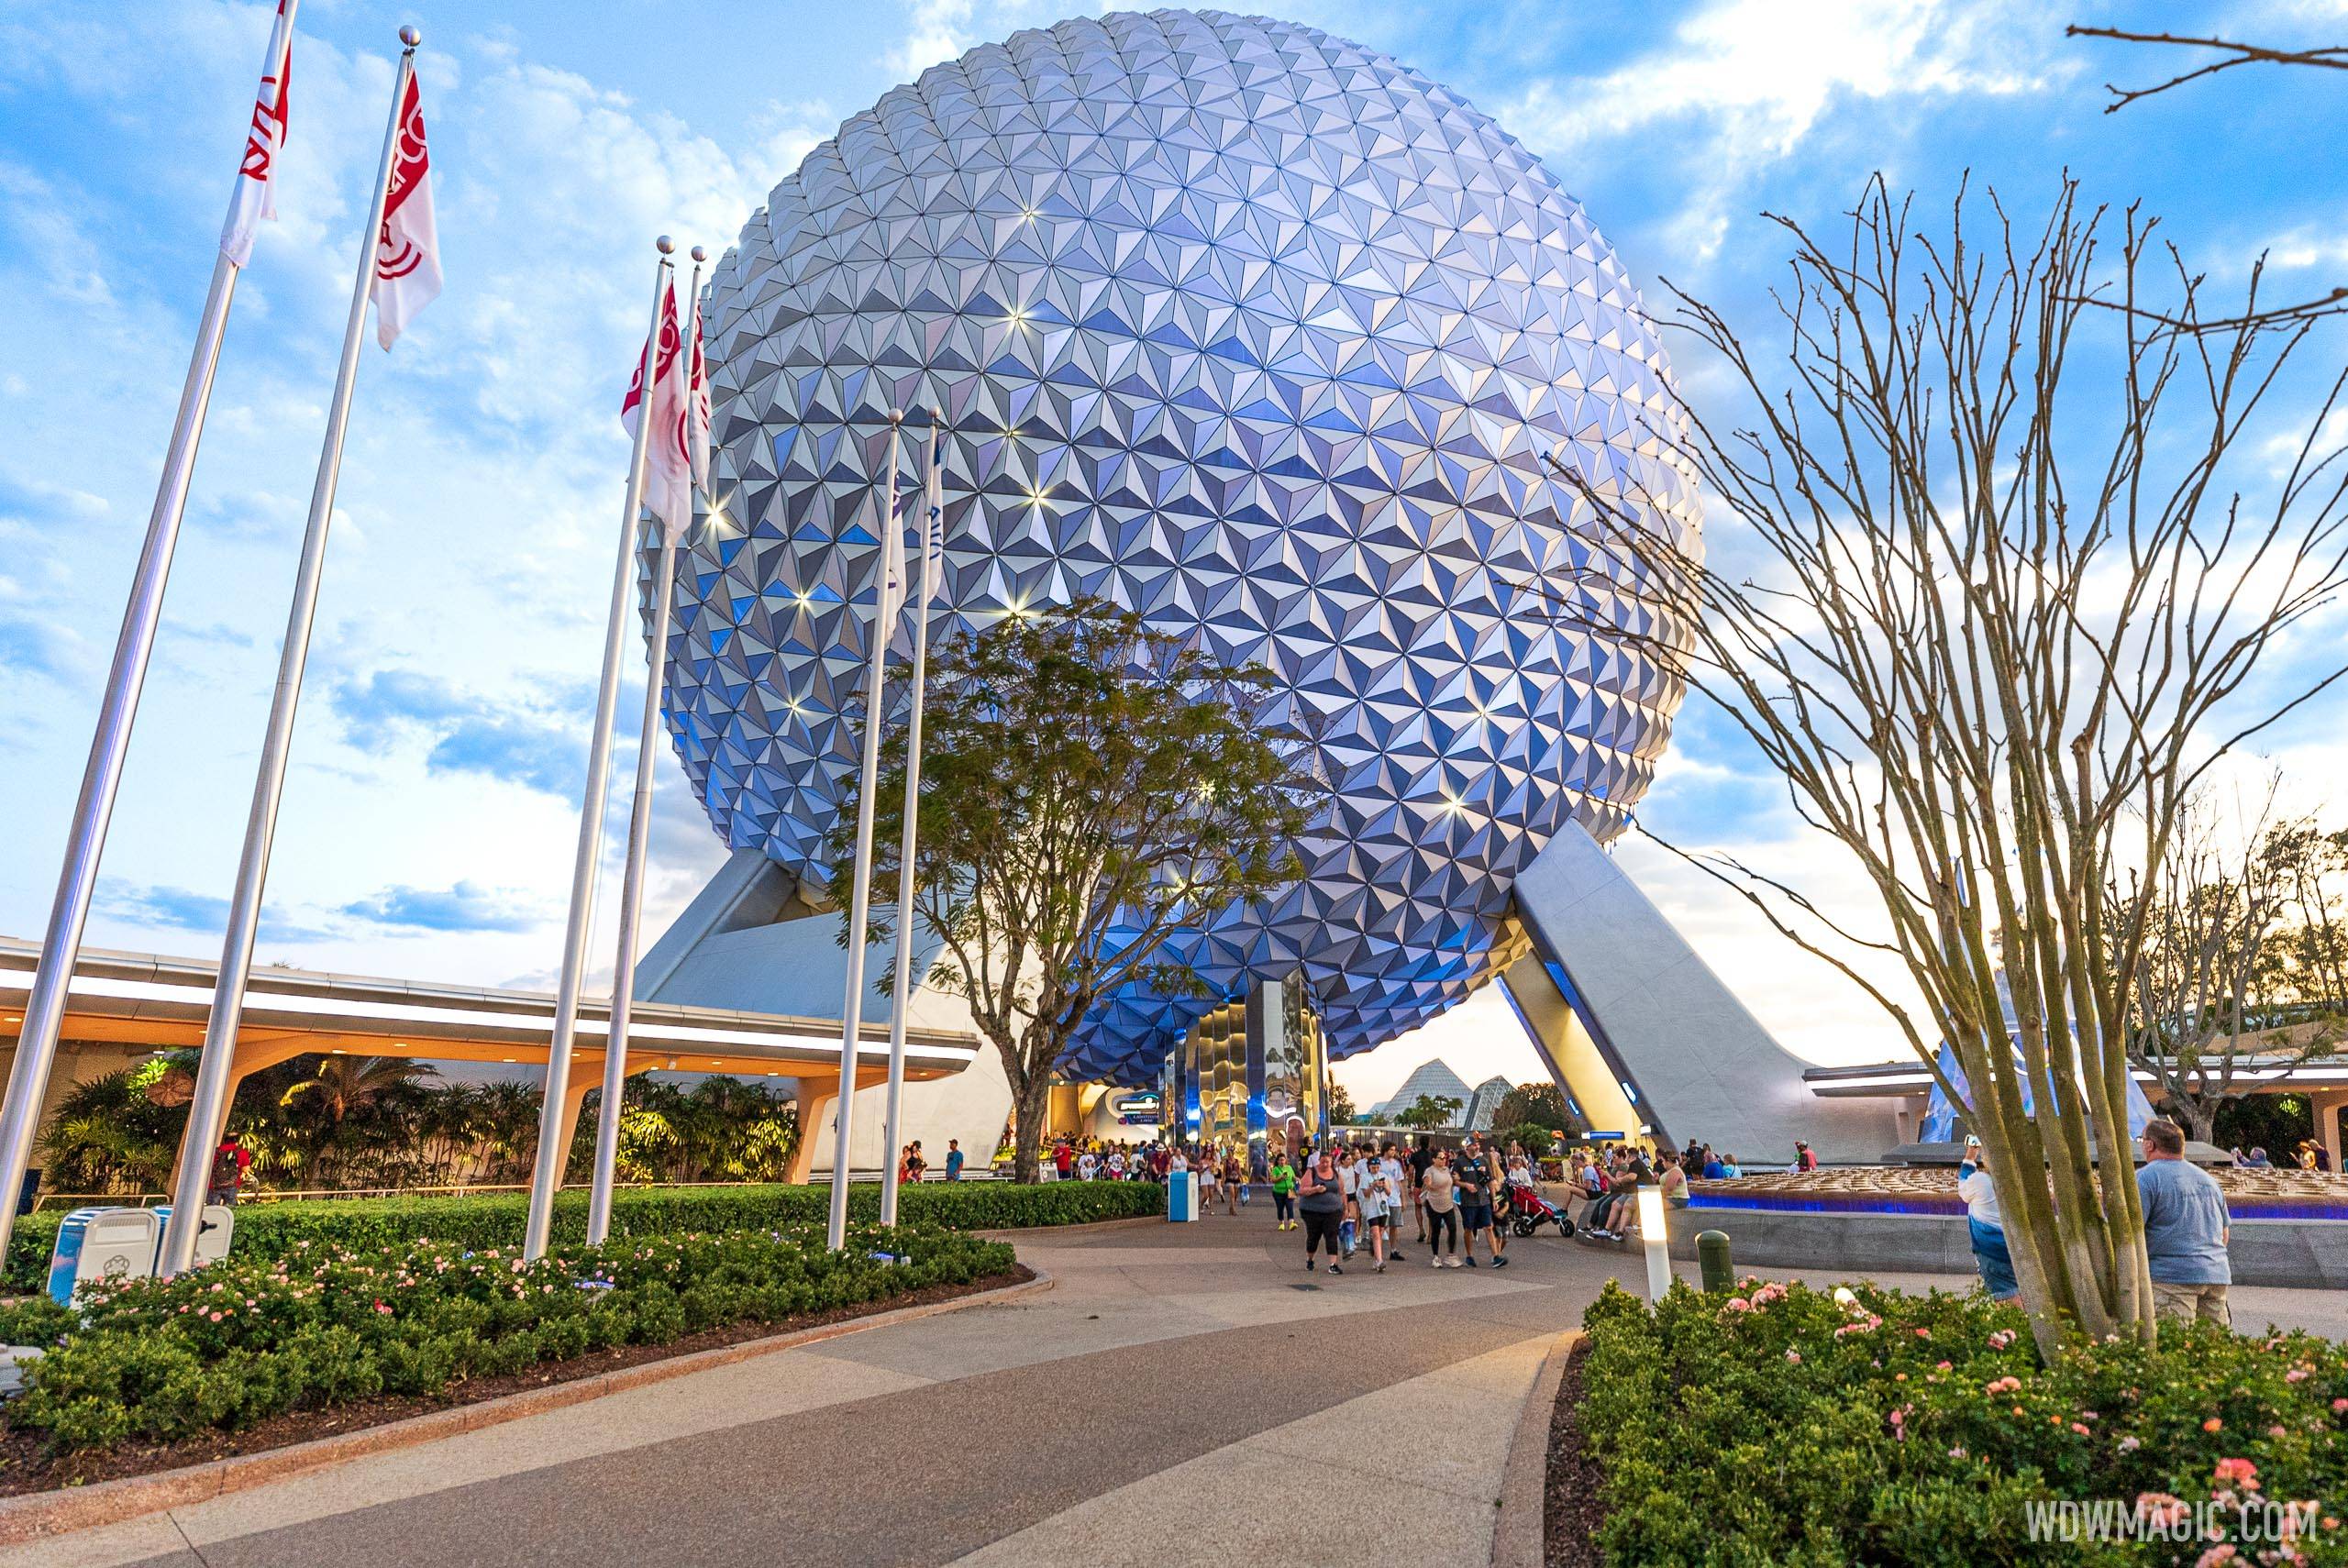 EPCOT will open at 9am for Walt Disney World Resort hotel guests and from 11am for all guests